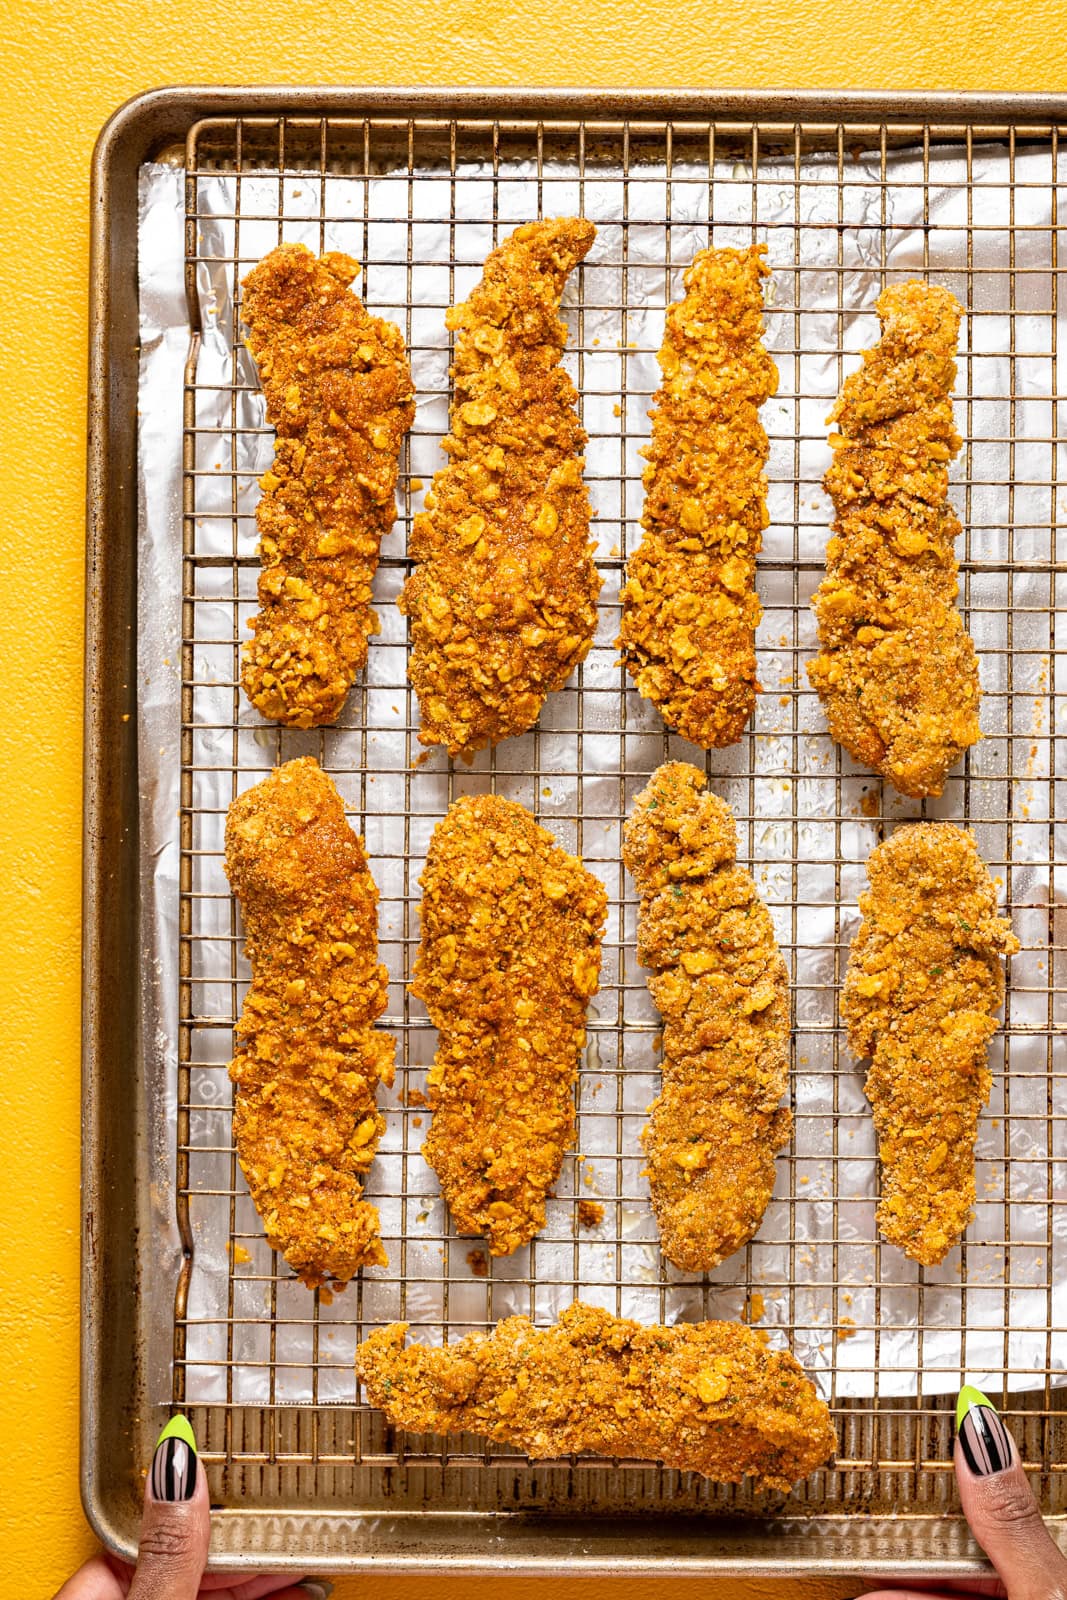 Chicken tenders lined on a baking sheet with wire rack.